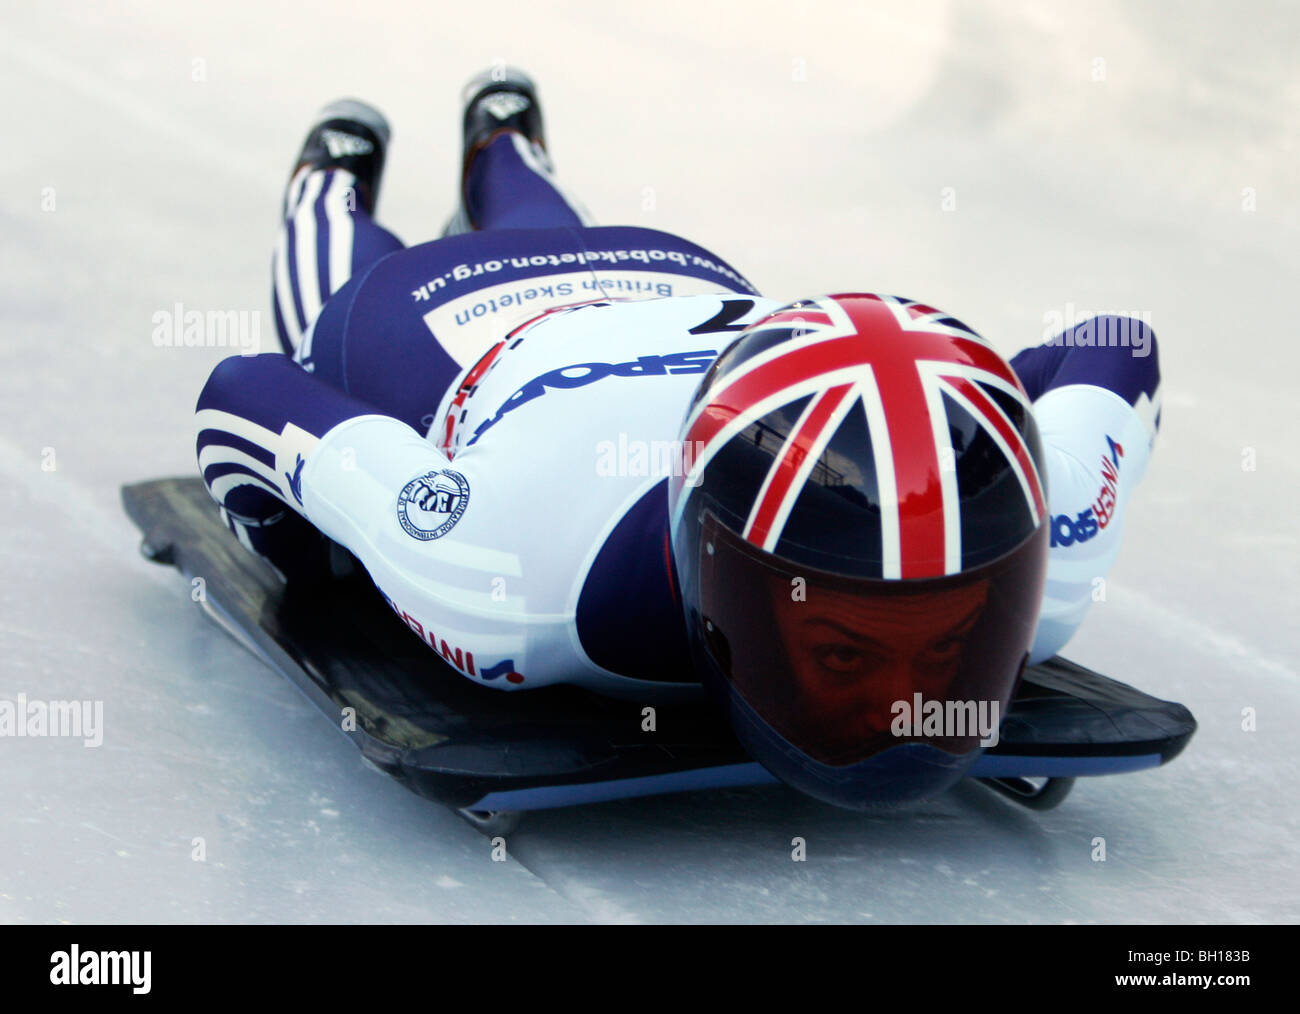 Great Britain Skeleton Athlete in action during the European Championships Held in Igls, Austria Stock Photo